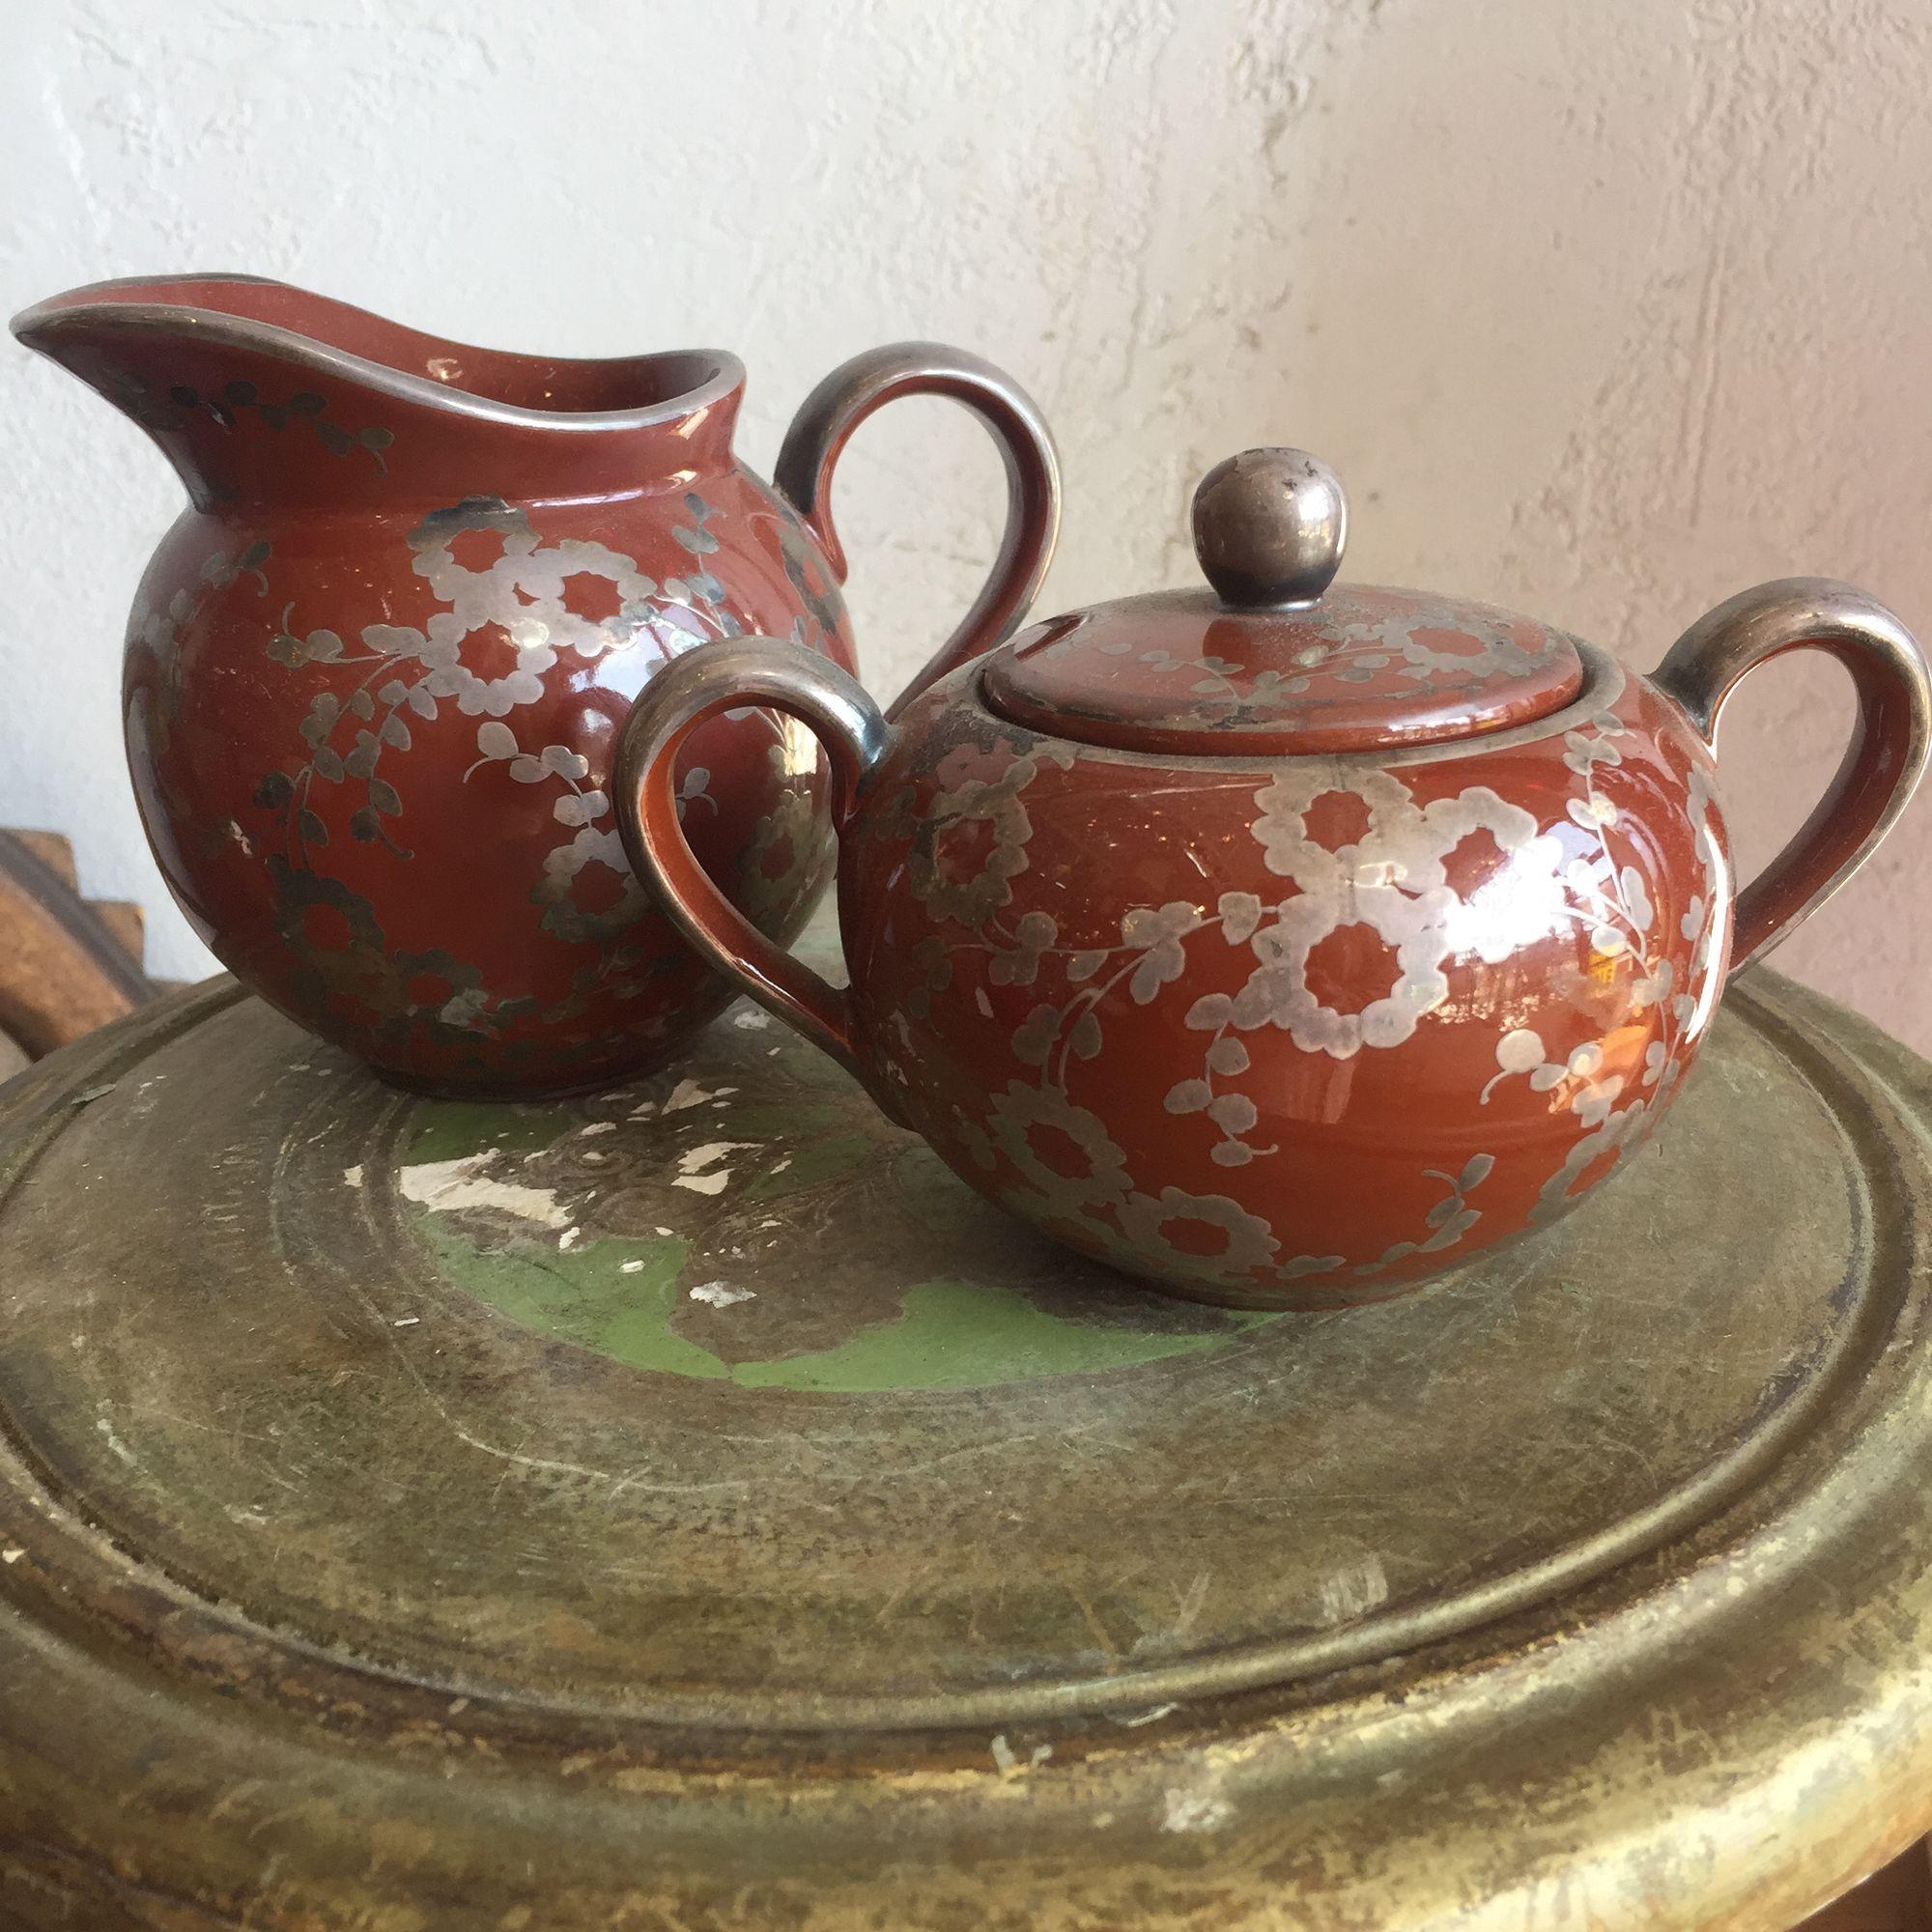 Midcentury japanese creamer and sugar bowl with a lovely detailed flower vine motif in a rake glaze finish.

In excellent mint condition with no chips, no cracks, no scratches.

Creamer 5